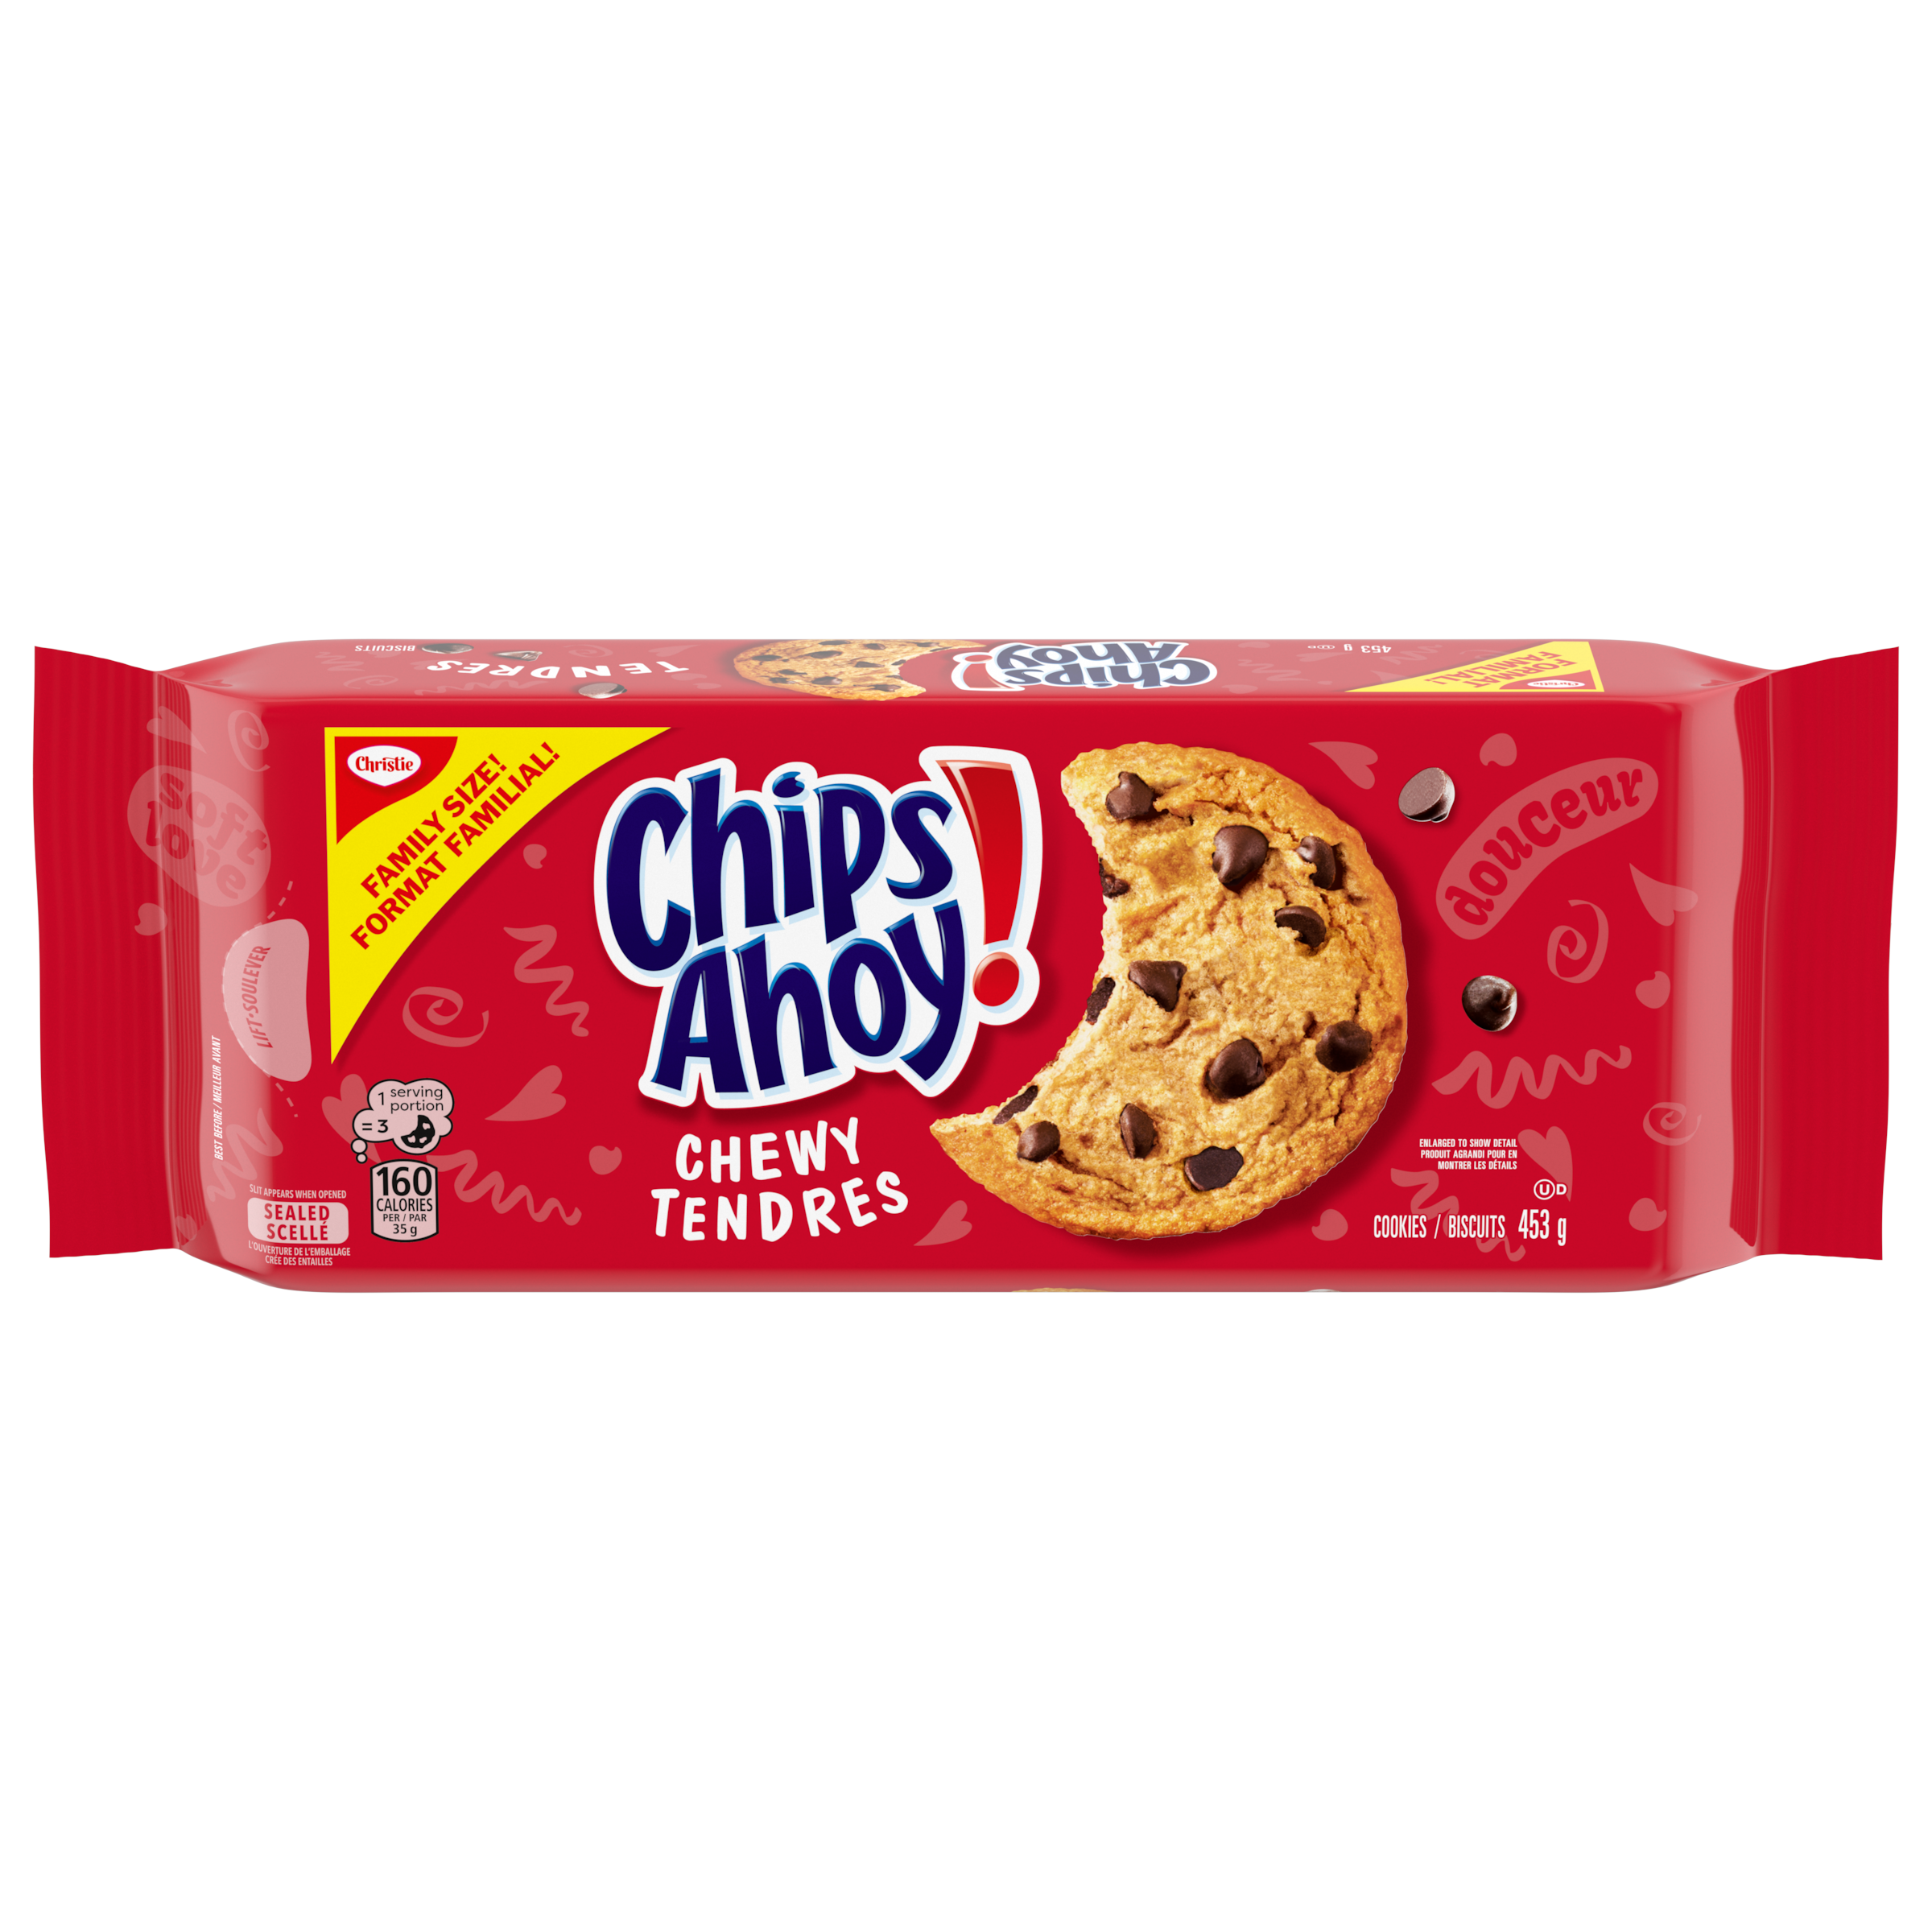 Biscuits CHIPS AHOY! Tendres, 1 emballage refermable, format familial de 453 g-0